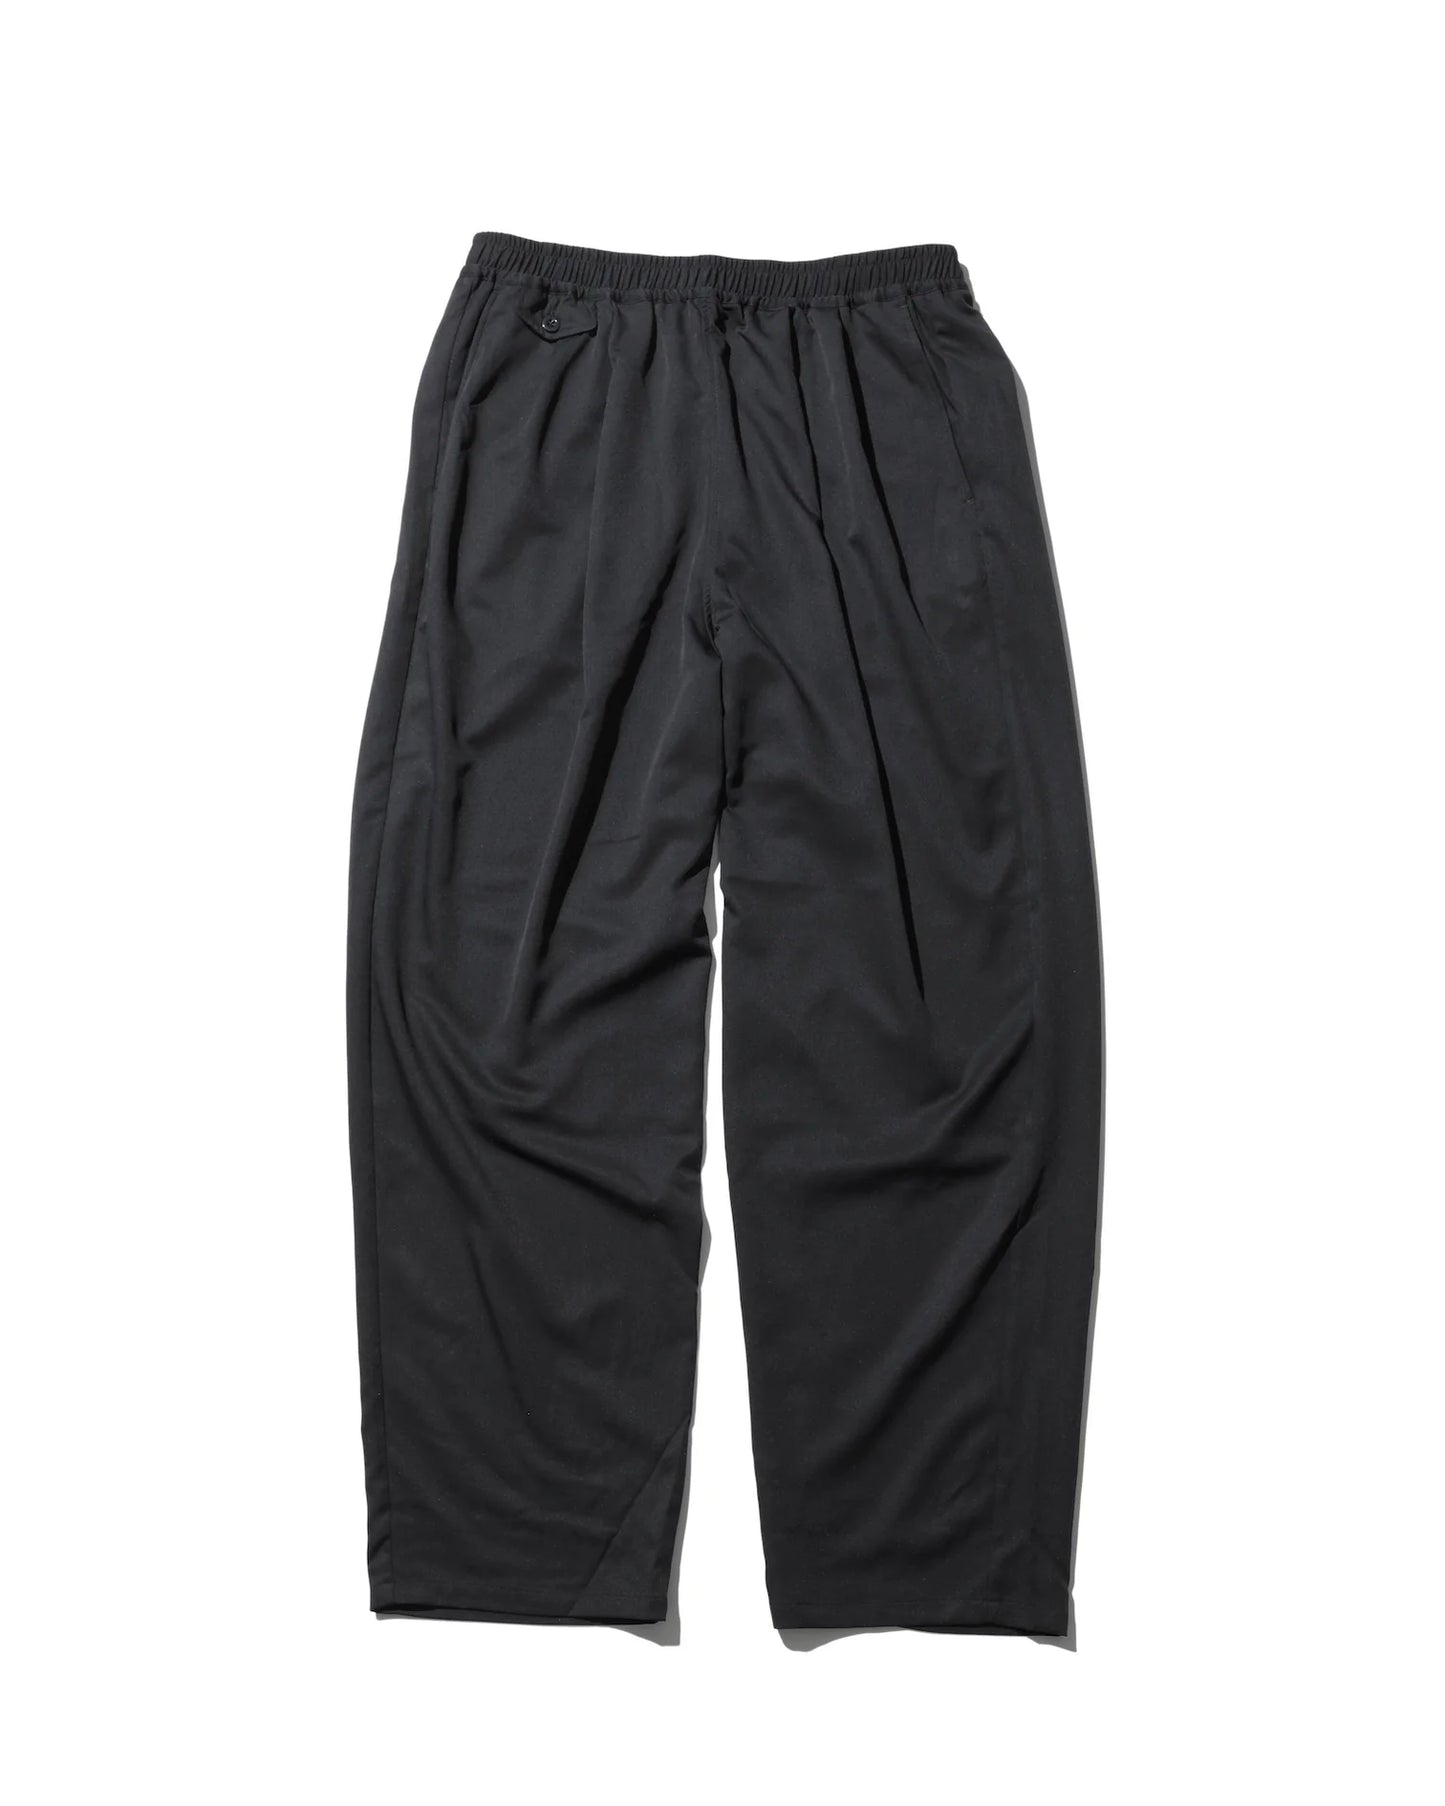 FreshService COOLFIBER TWO TUCK EASY PANTS